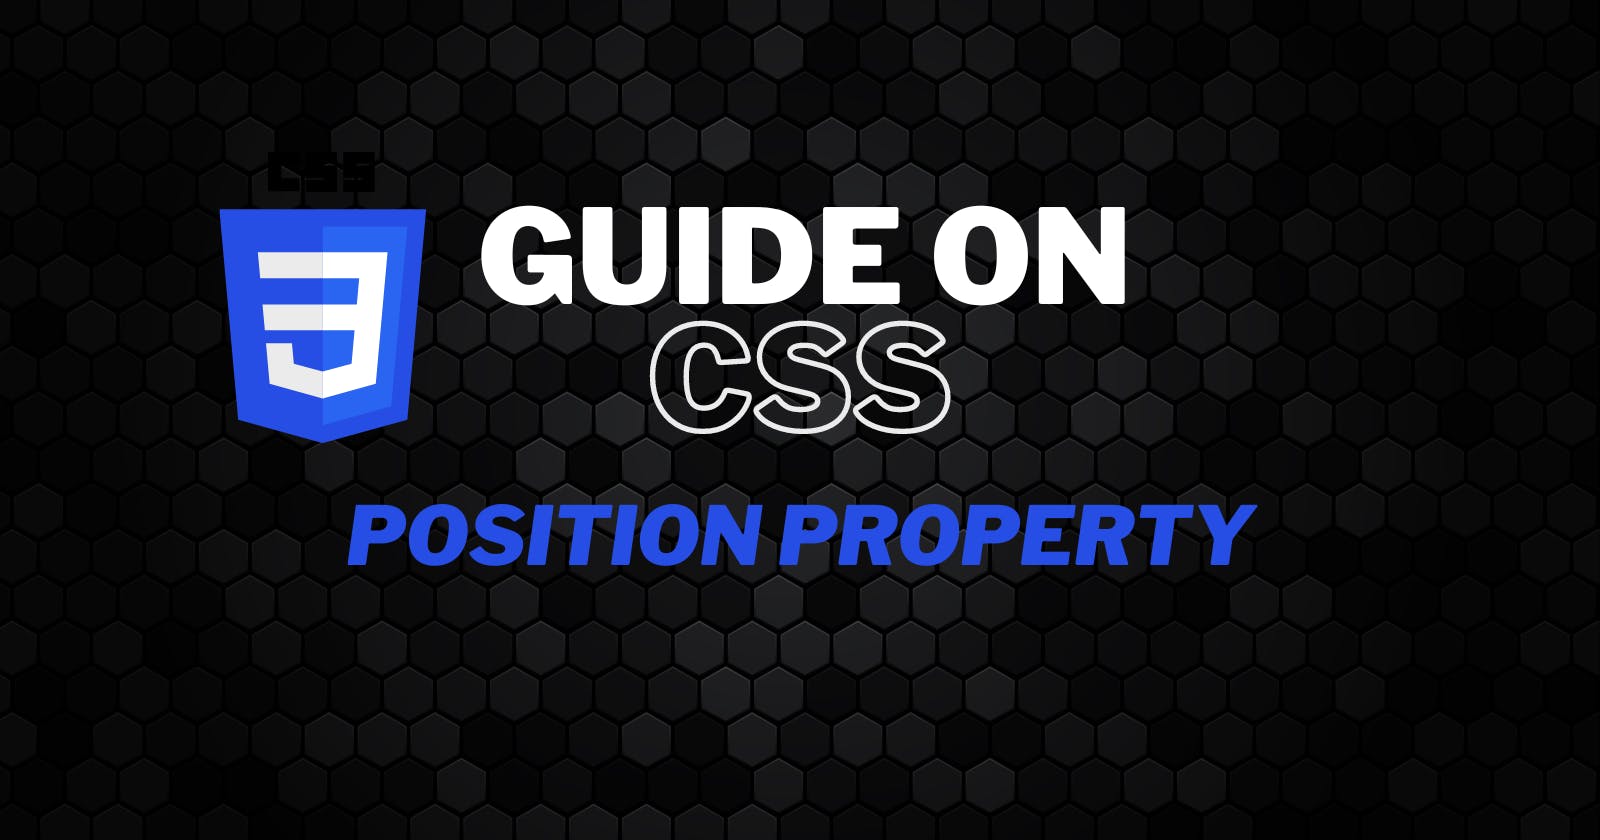 Guide on CSS Position Property